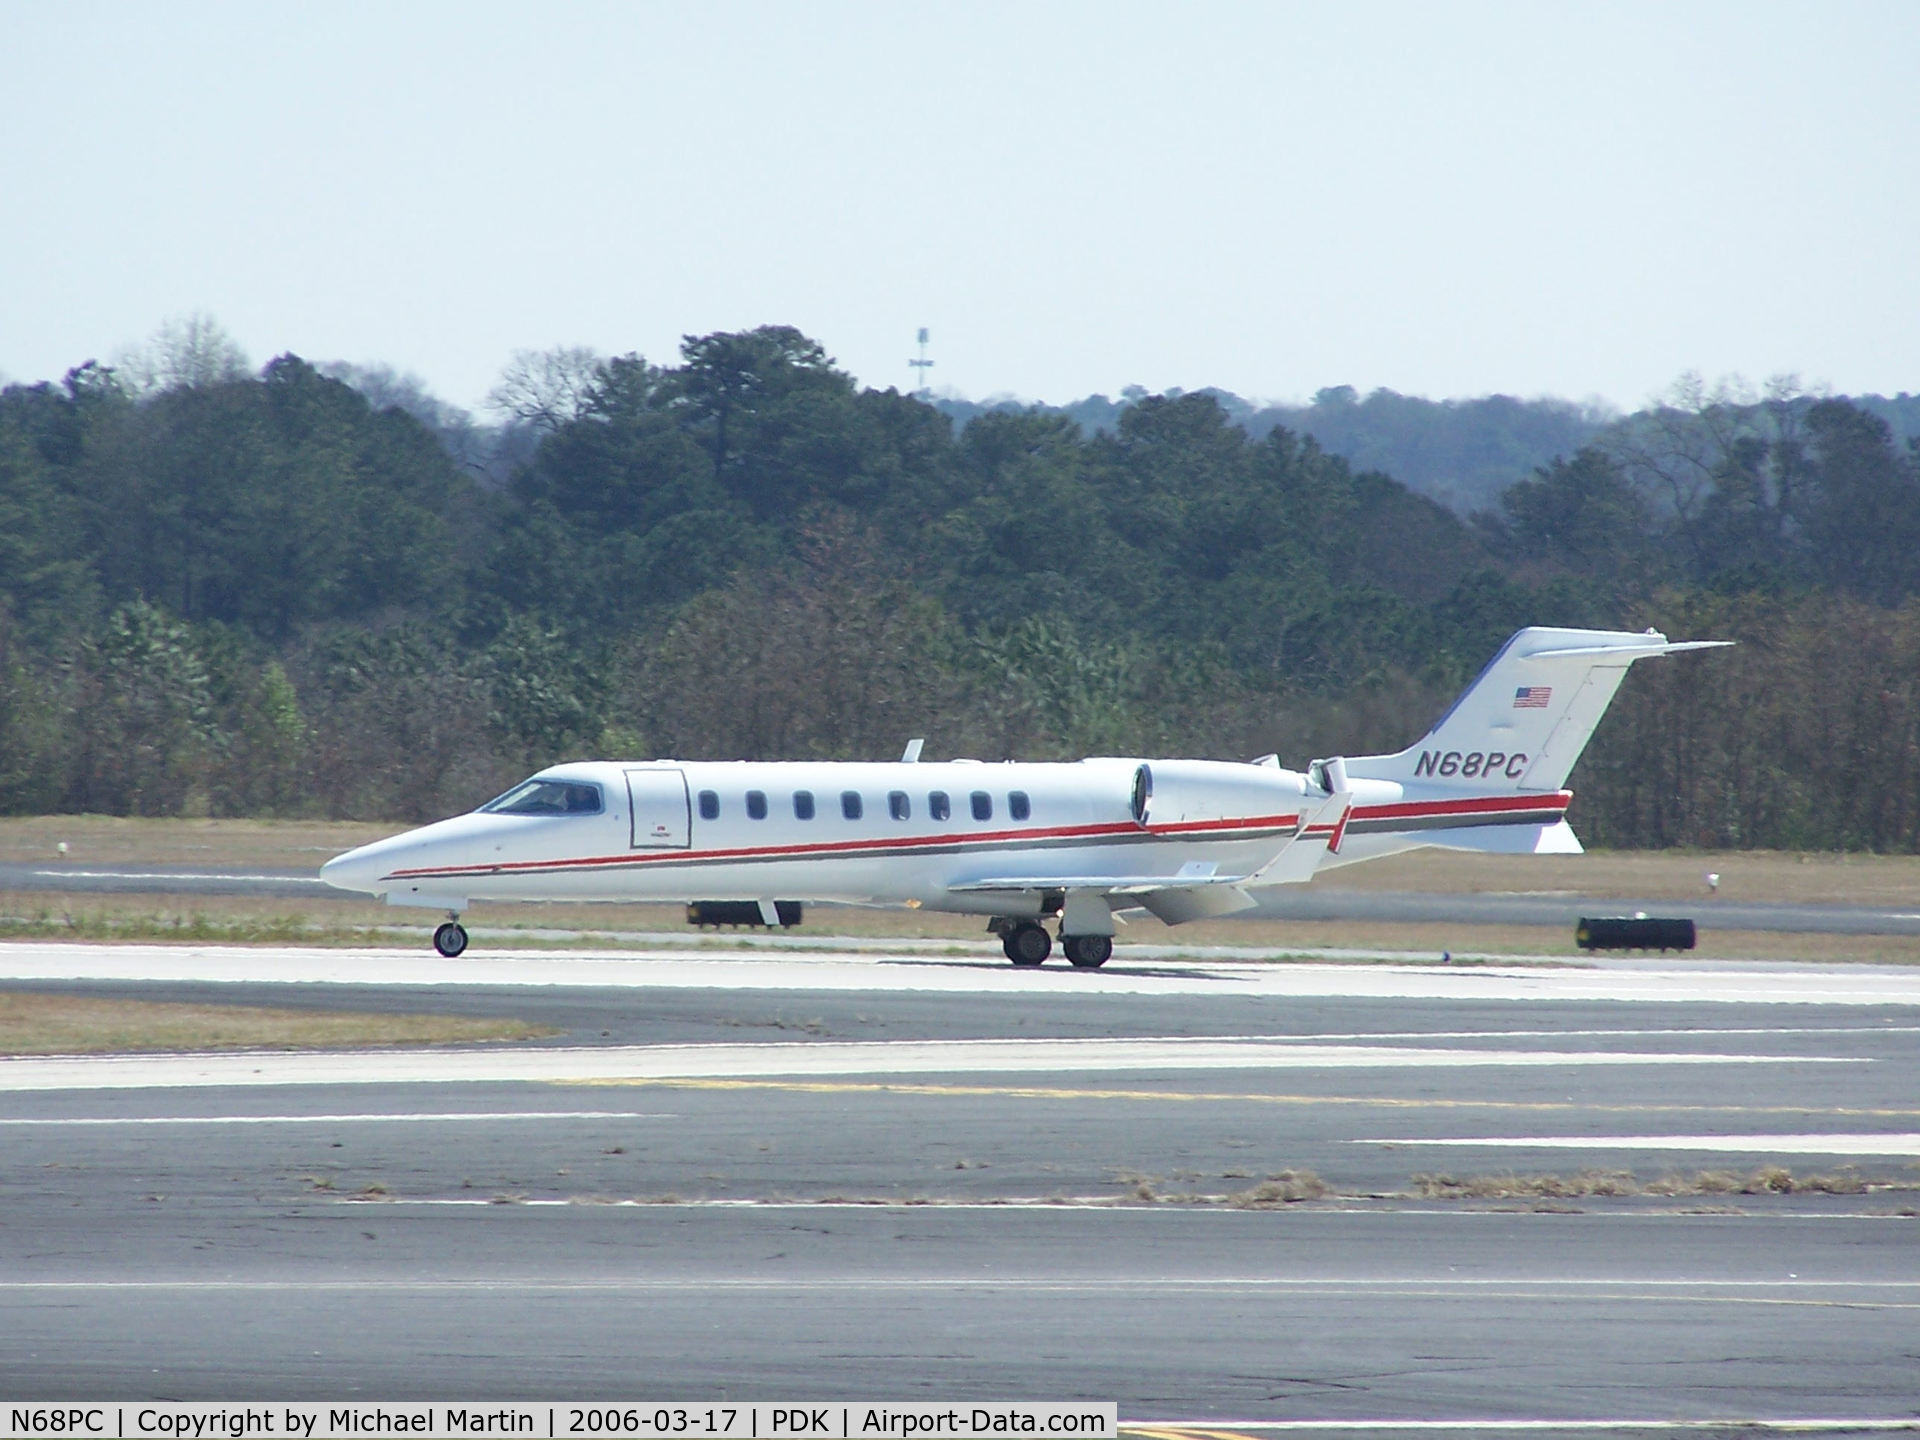 N68PC, Learjet 45 C/N 289, Landing PDK on 20R with airbrakes extended